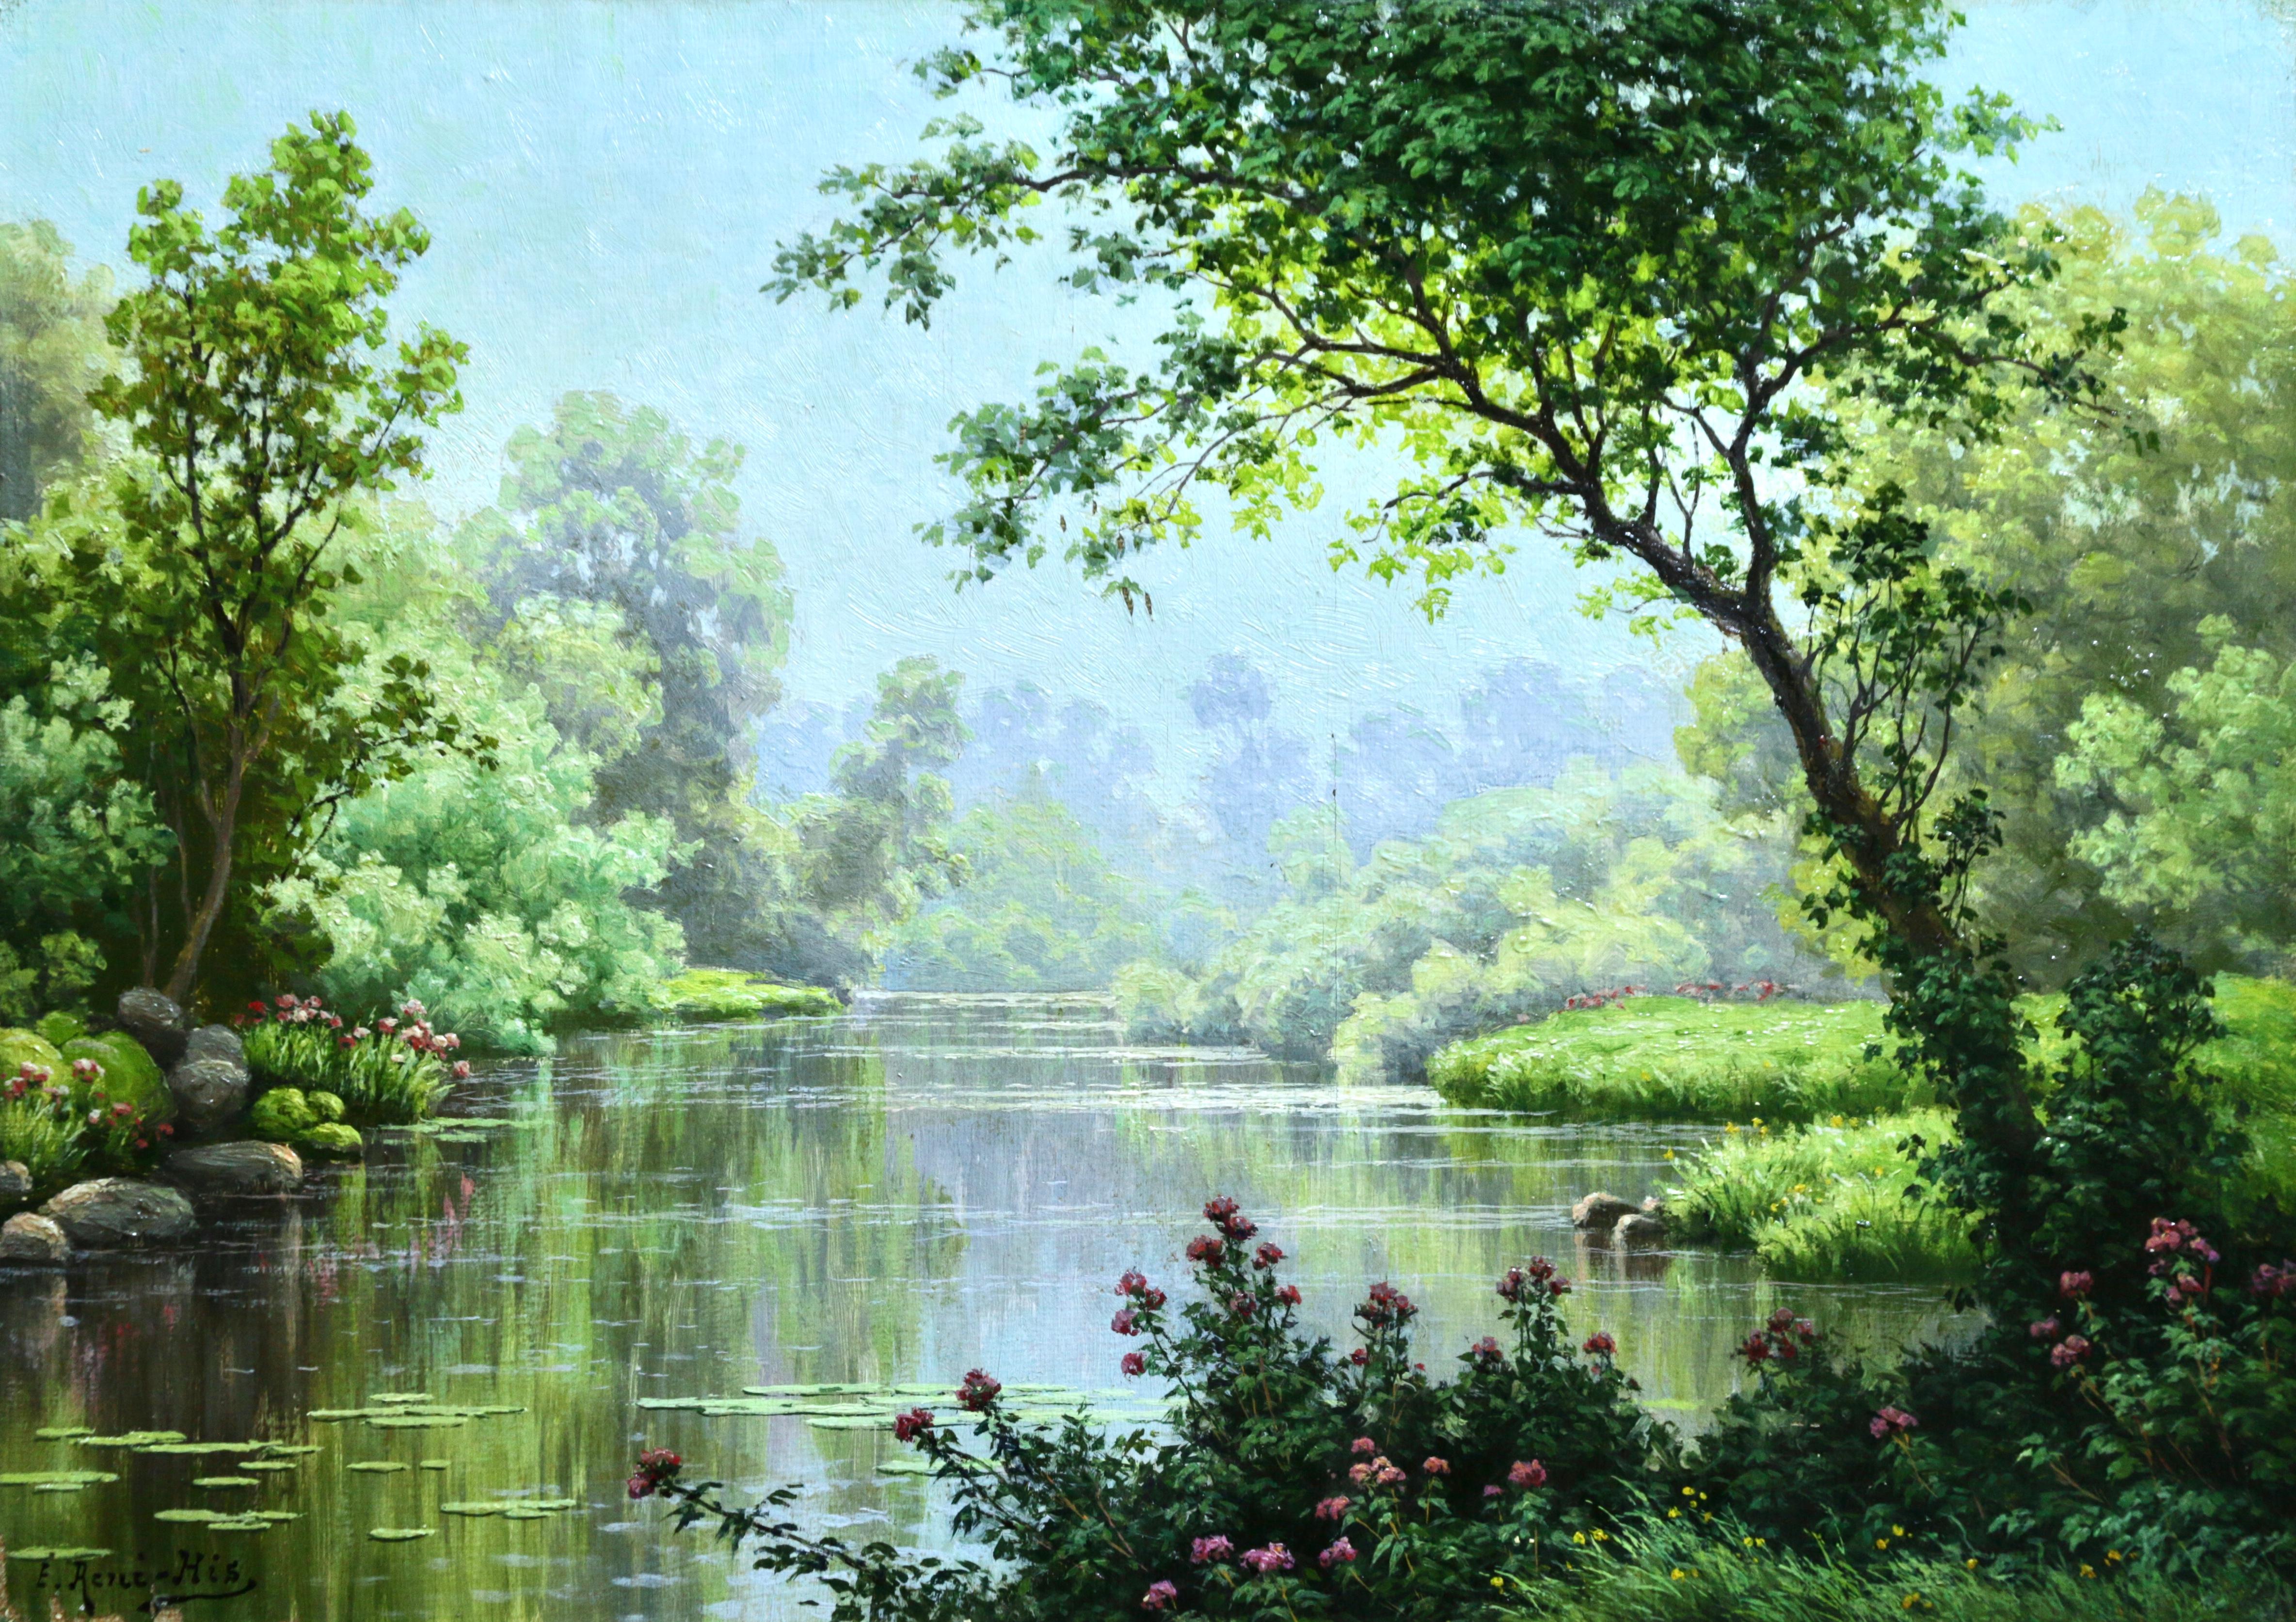 René Charles Edmond His Landscape Painting - Water Lilies on a River - Mid 20th Century Oil, Riverscape Landscape by Rene His